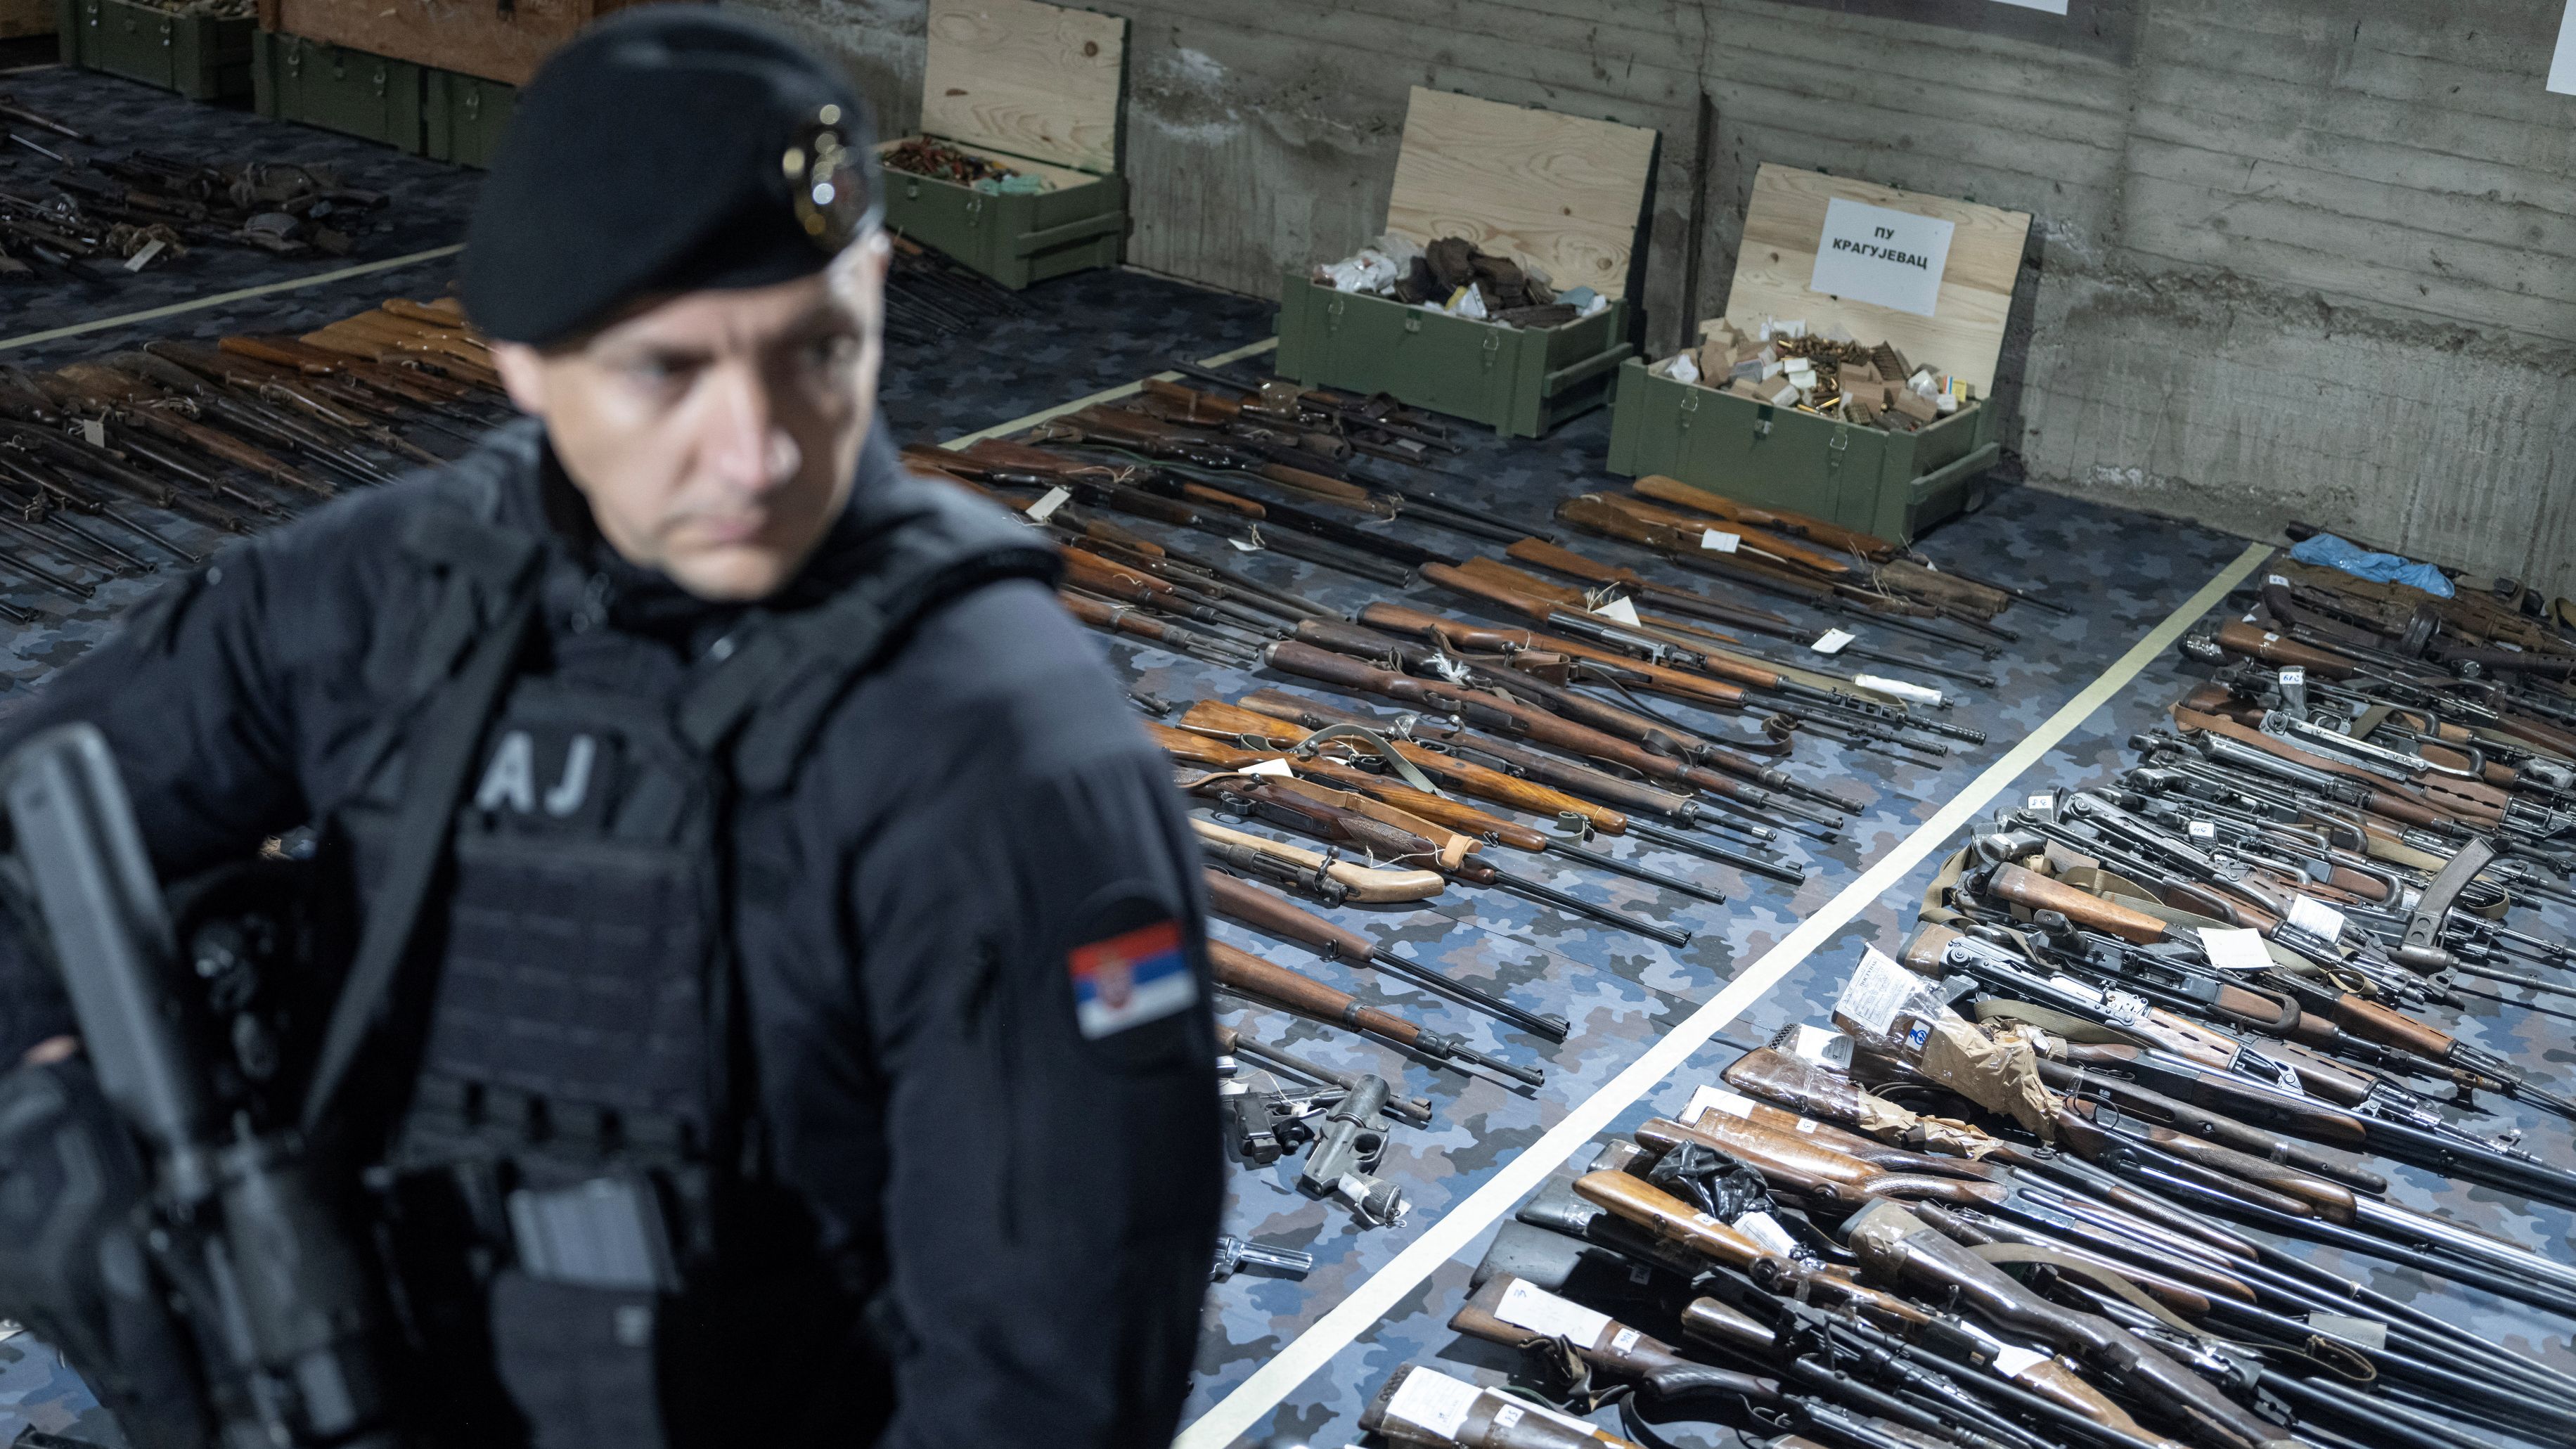 Police guard the weapons handed over at the start of the gun amnesty in Serbia./ Marko Djurica/Reuters